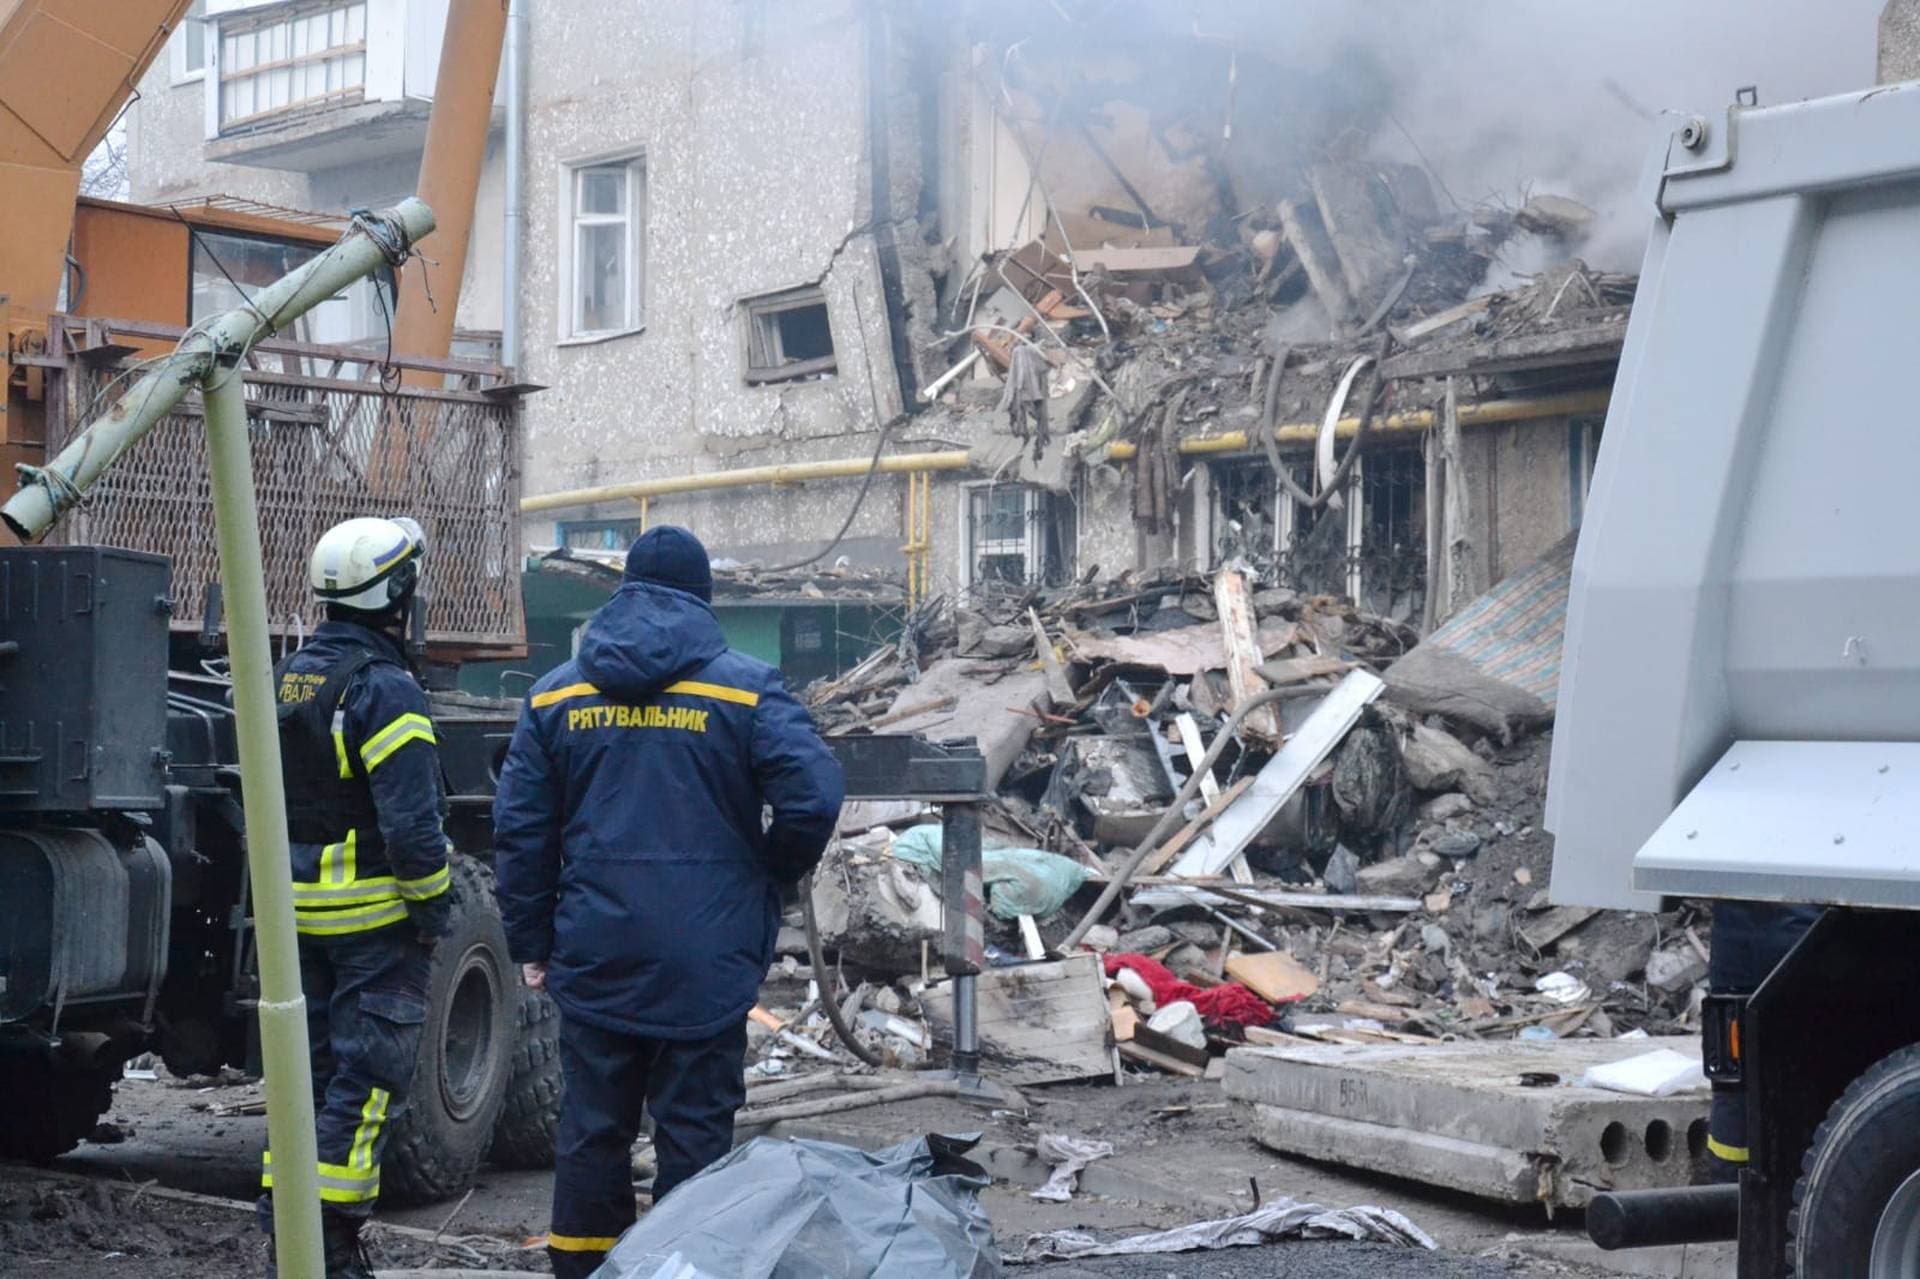 The aftermath of the Russian attack on an apartment building in Sumy on 13 March